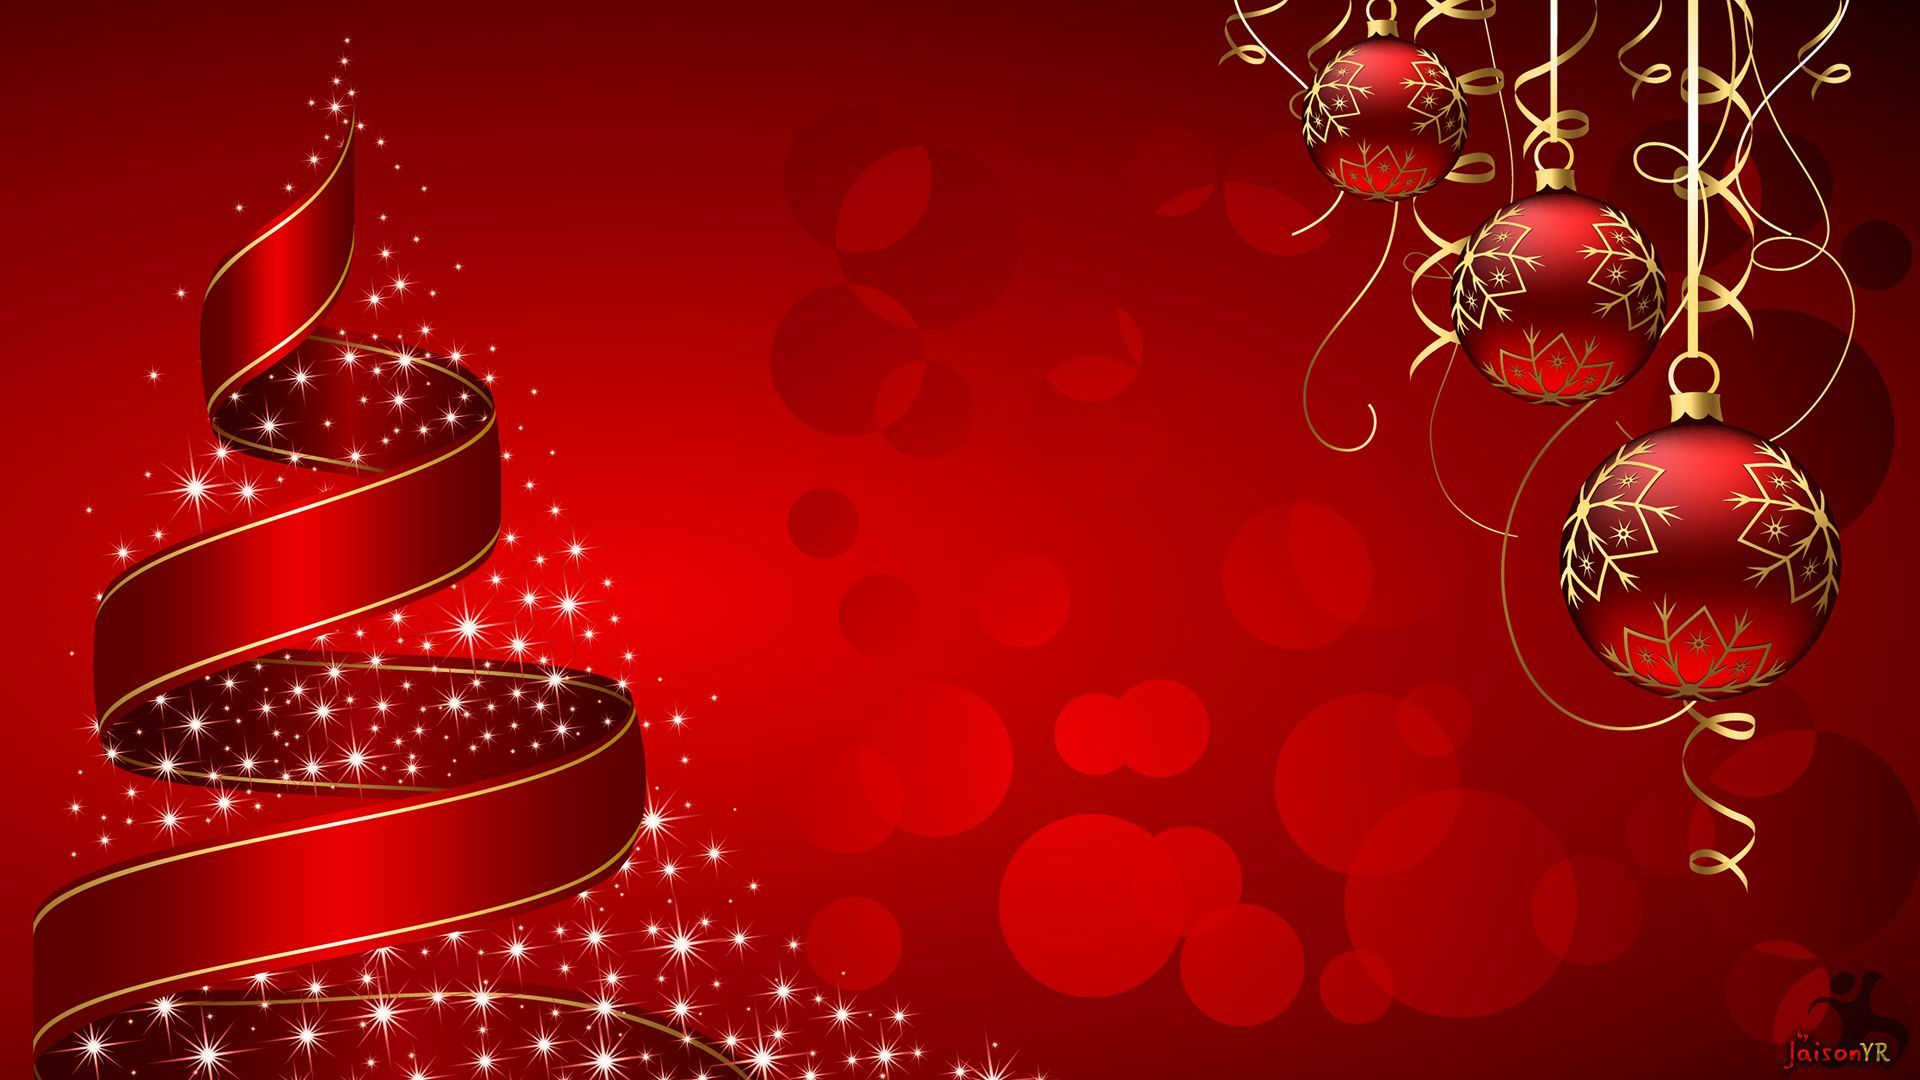 christmas background Large Image. Merry christmas wallpaper, Christmas wallpaper free, Free christmas wallpaper downloads